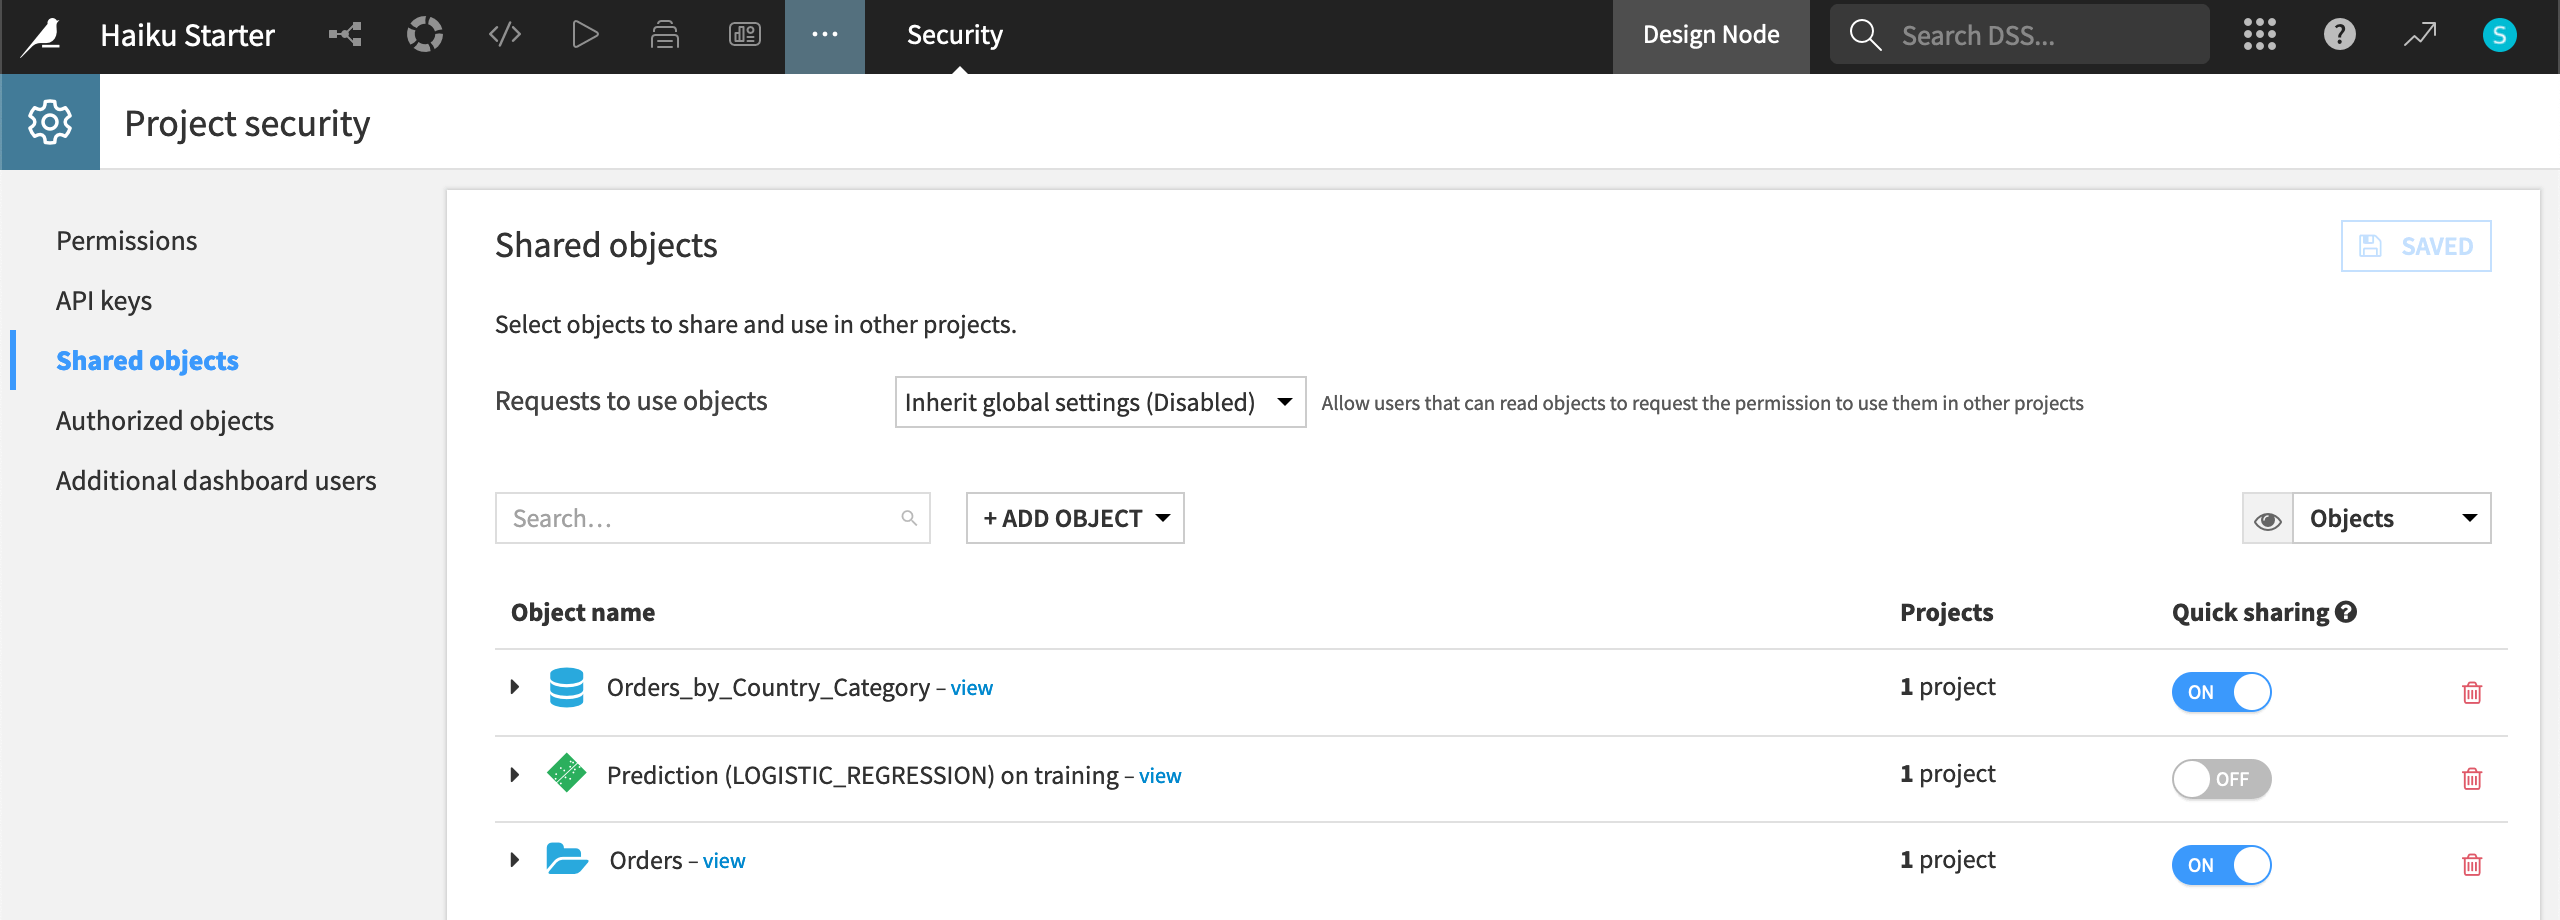 Dataiku screenshot of the shared objects panel of the project security page.